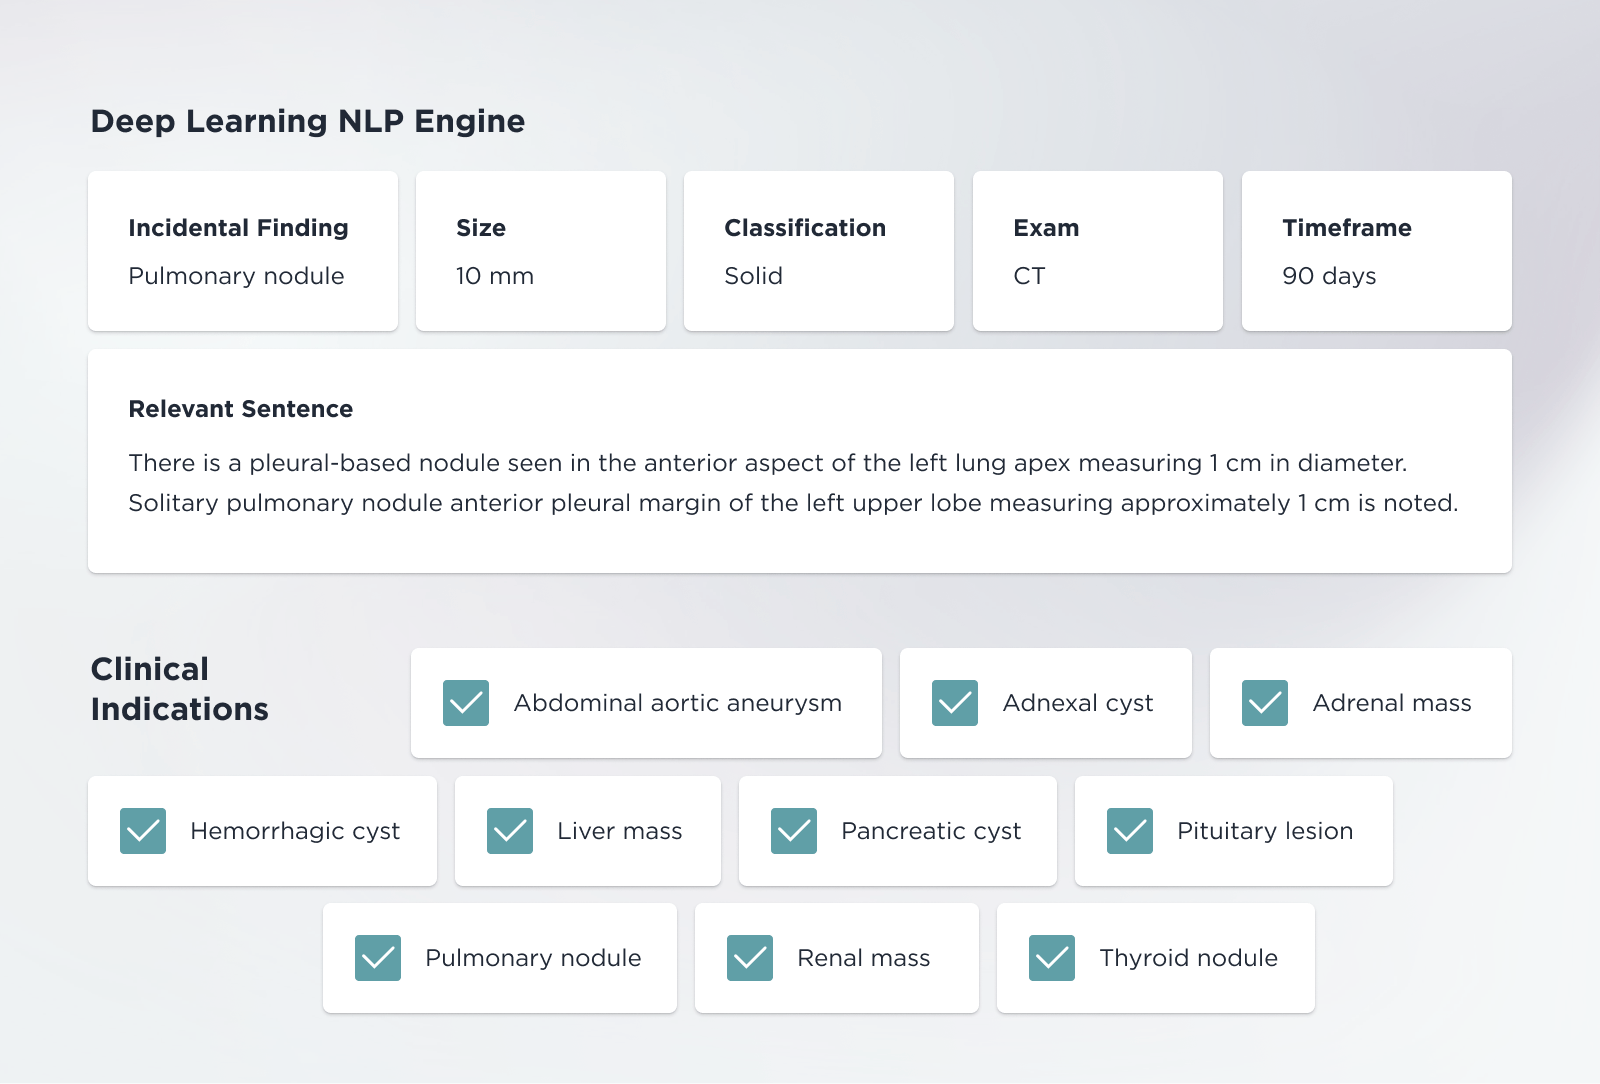 Examples of the clinical indications that the RadiLens deep learning NLP engine extracts